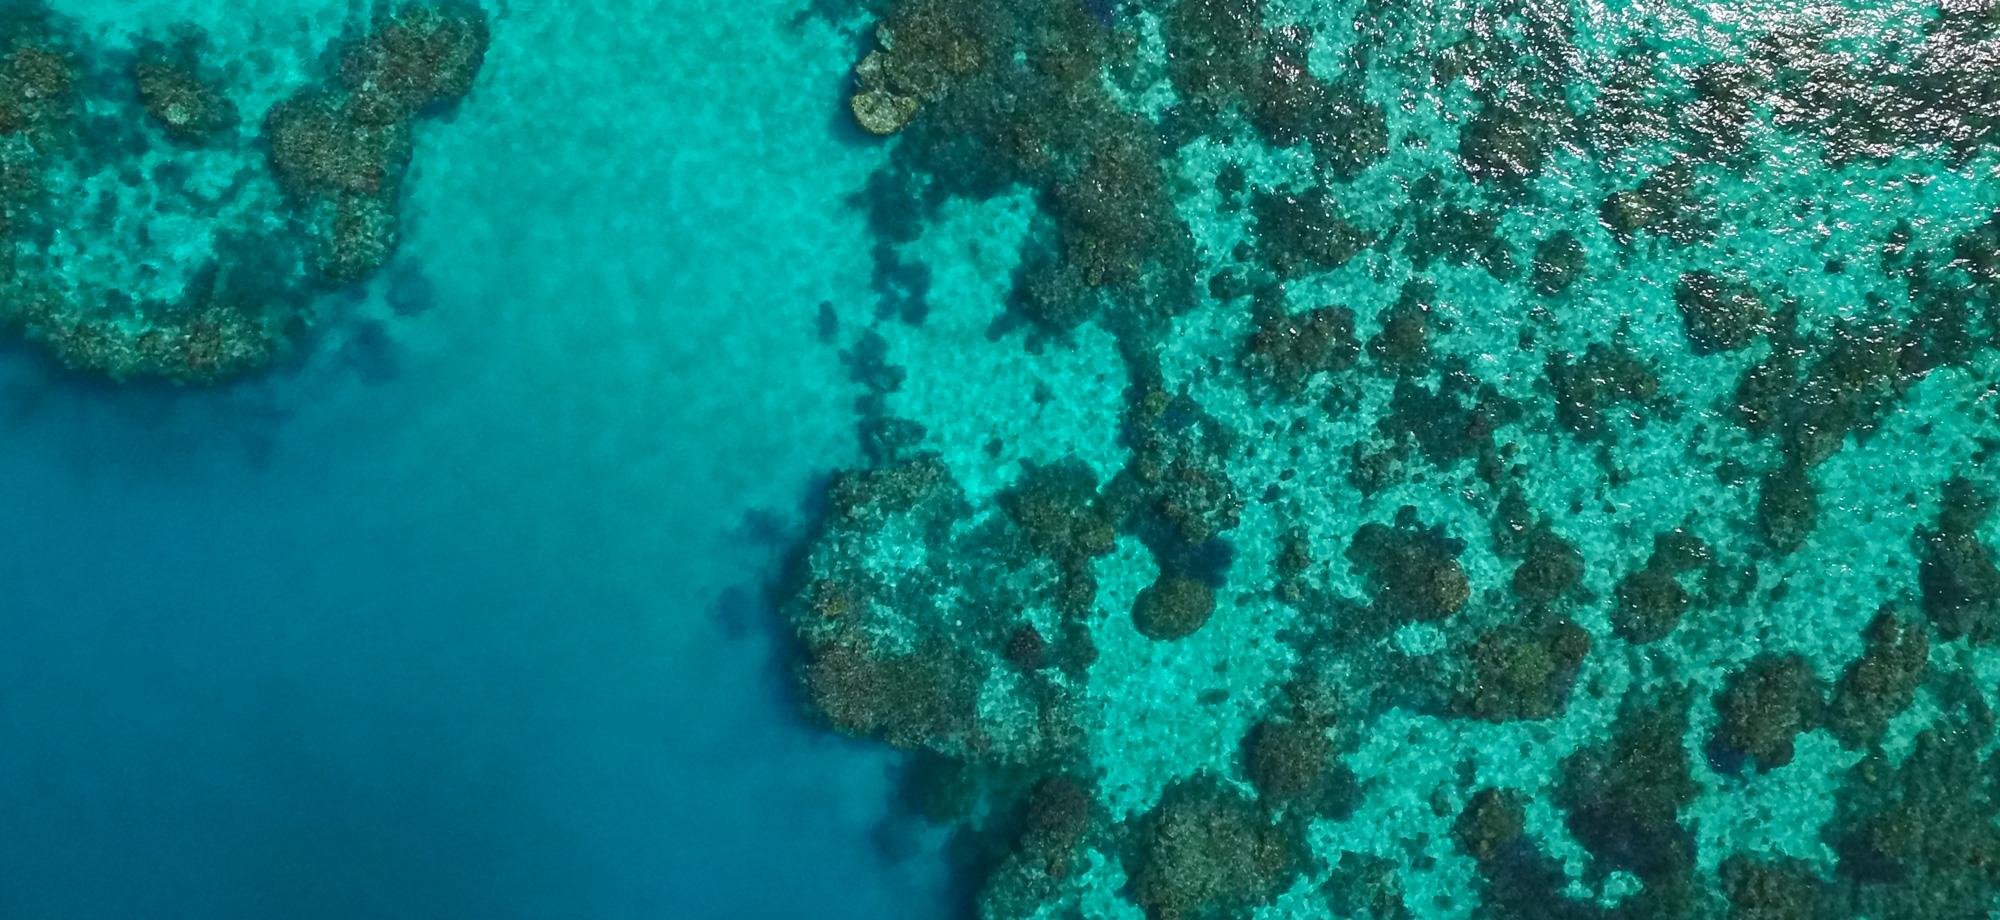 Some parts of the Great Barrier Reef are recovering, Australian scientists claim